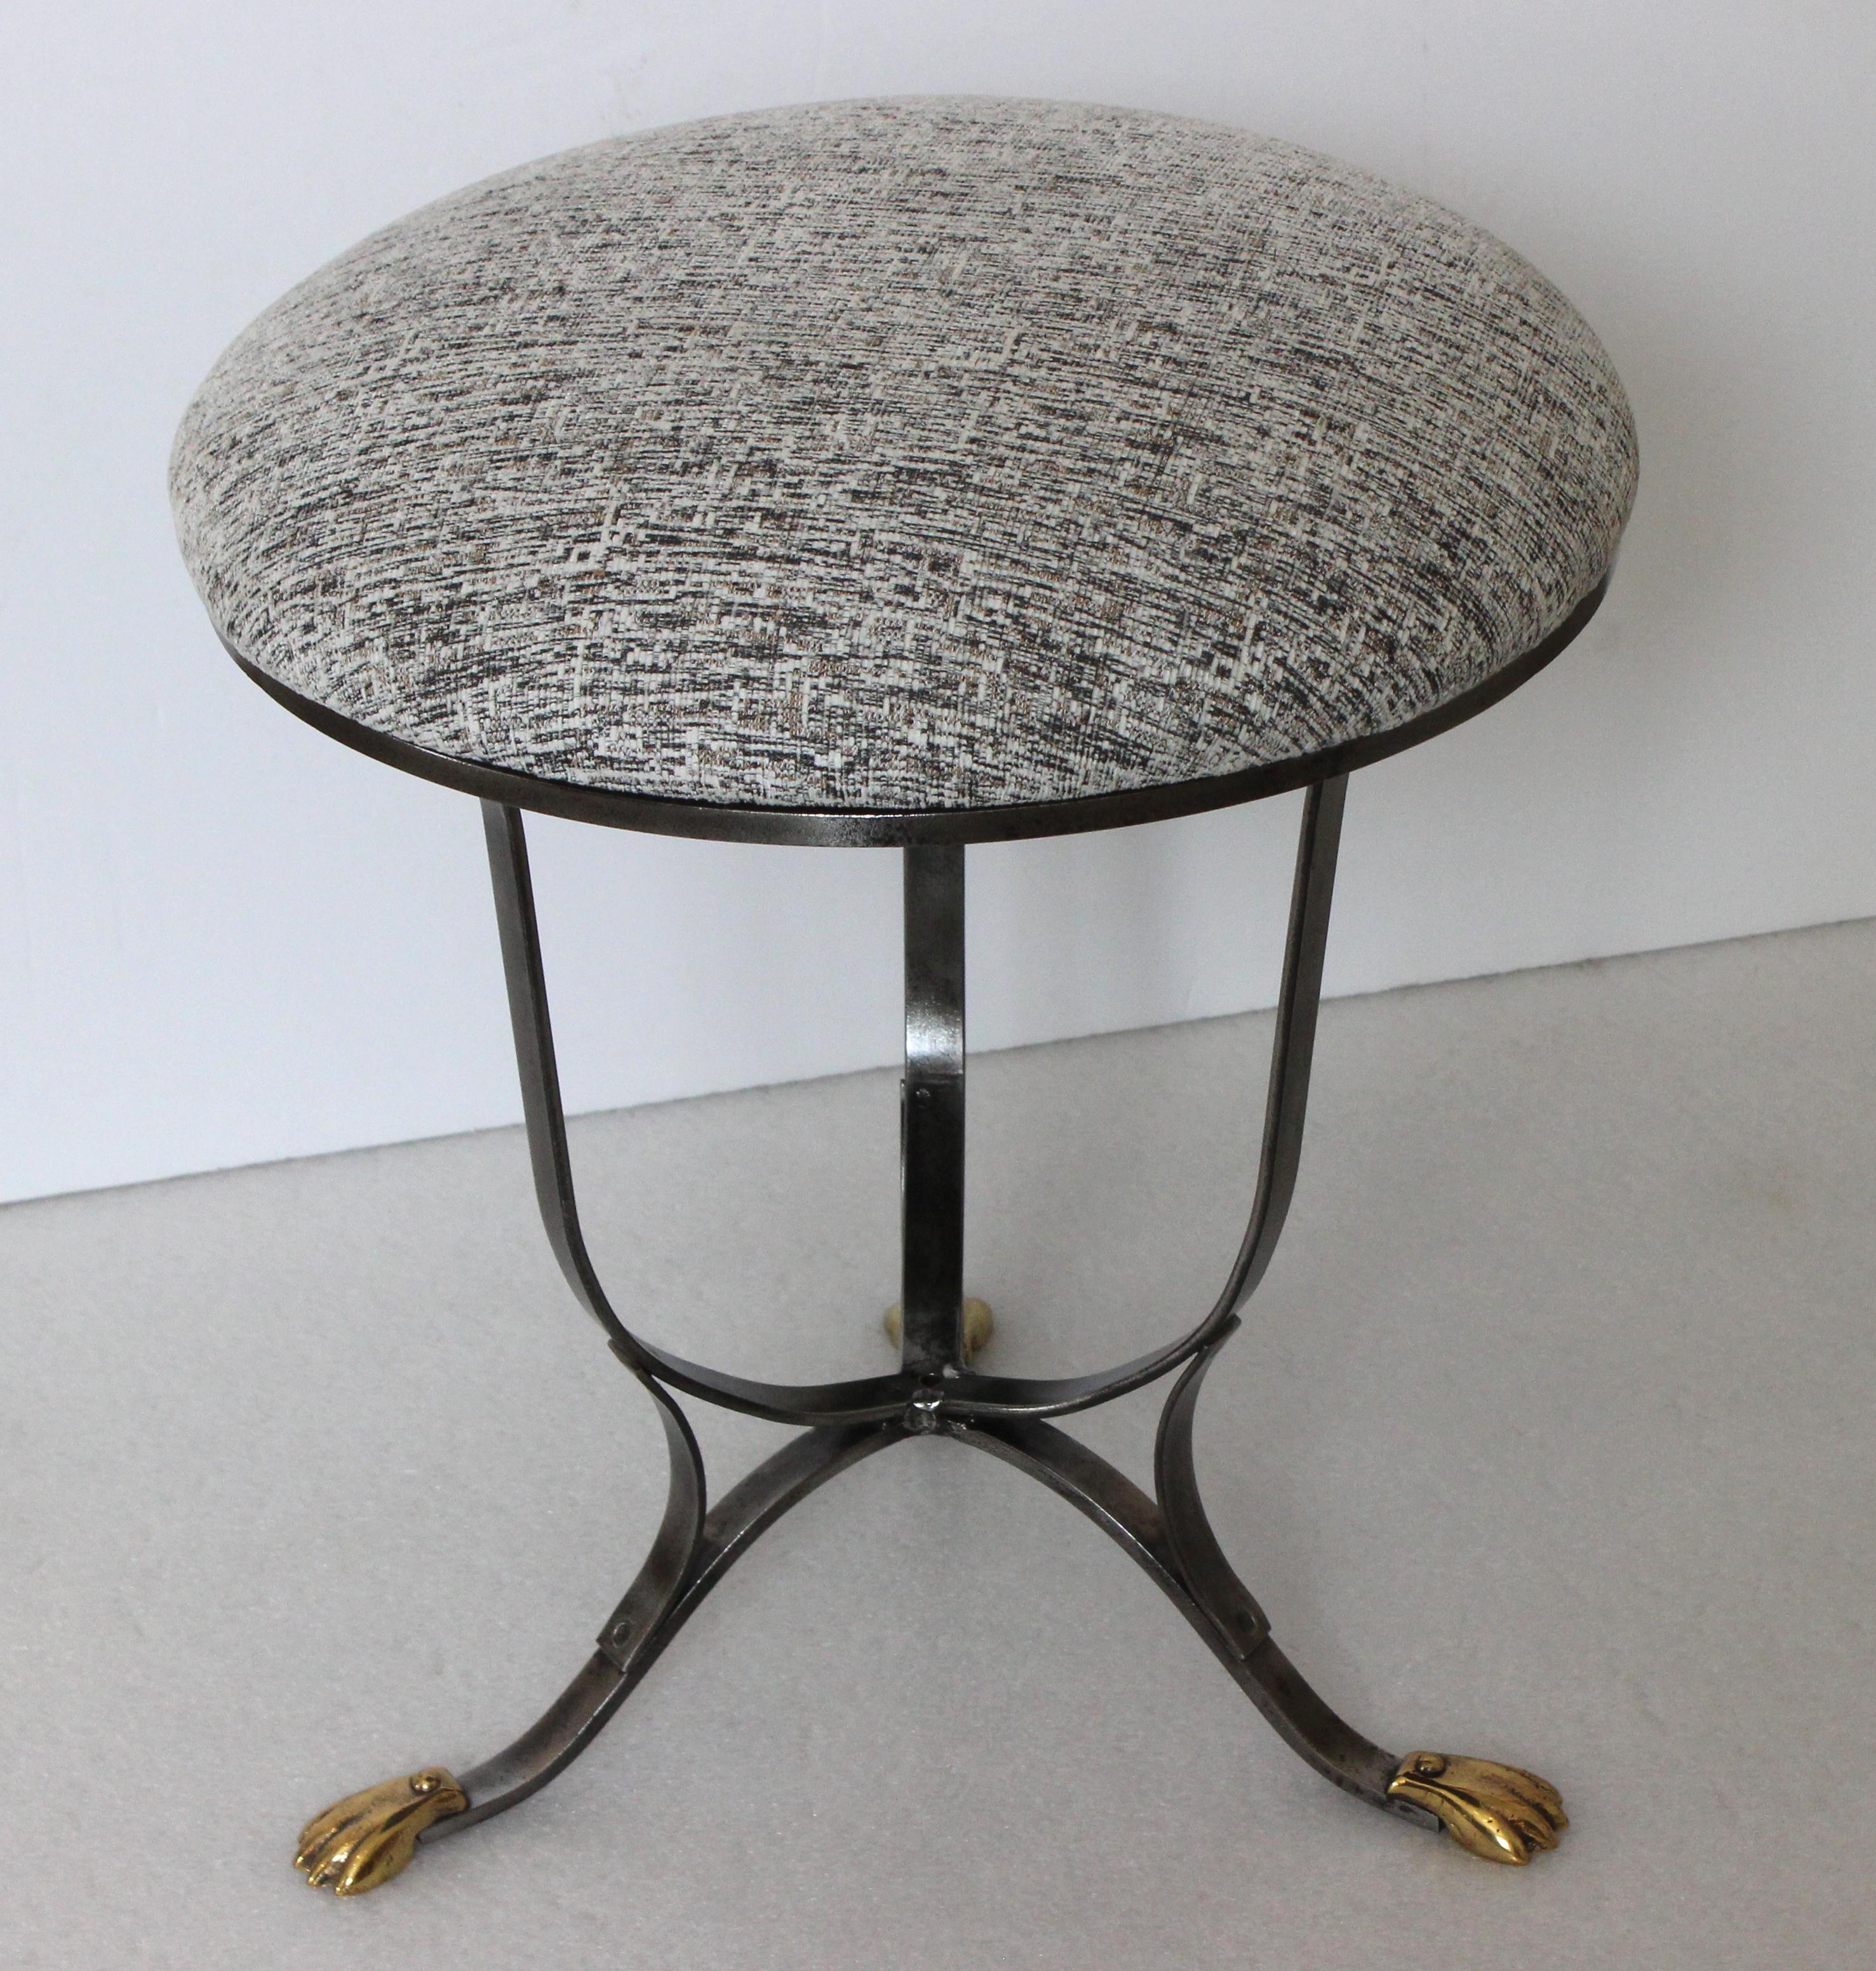 Empire Revival Trouvailles French Empire Campaign Stool For Sale